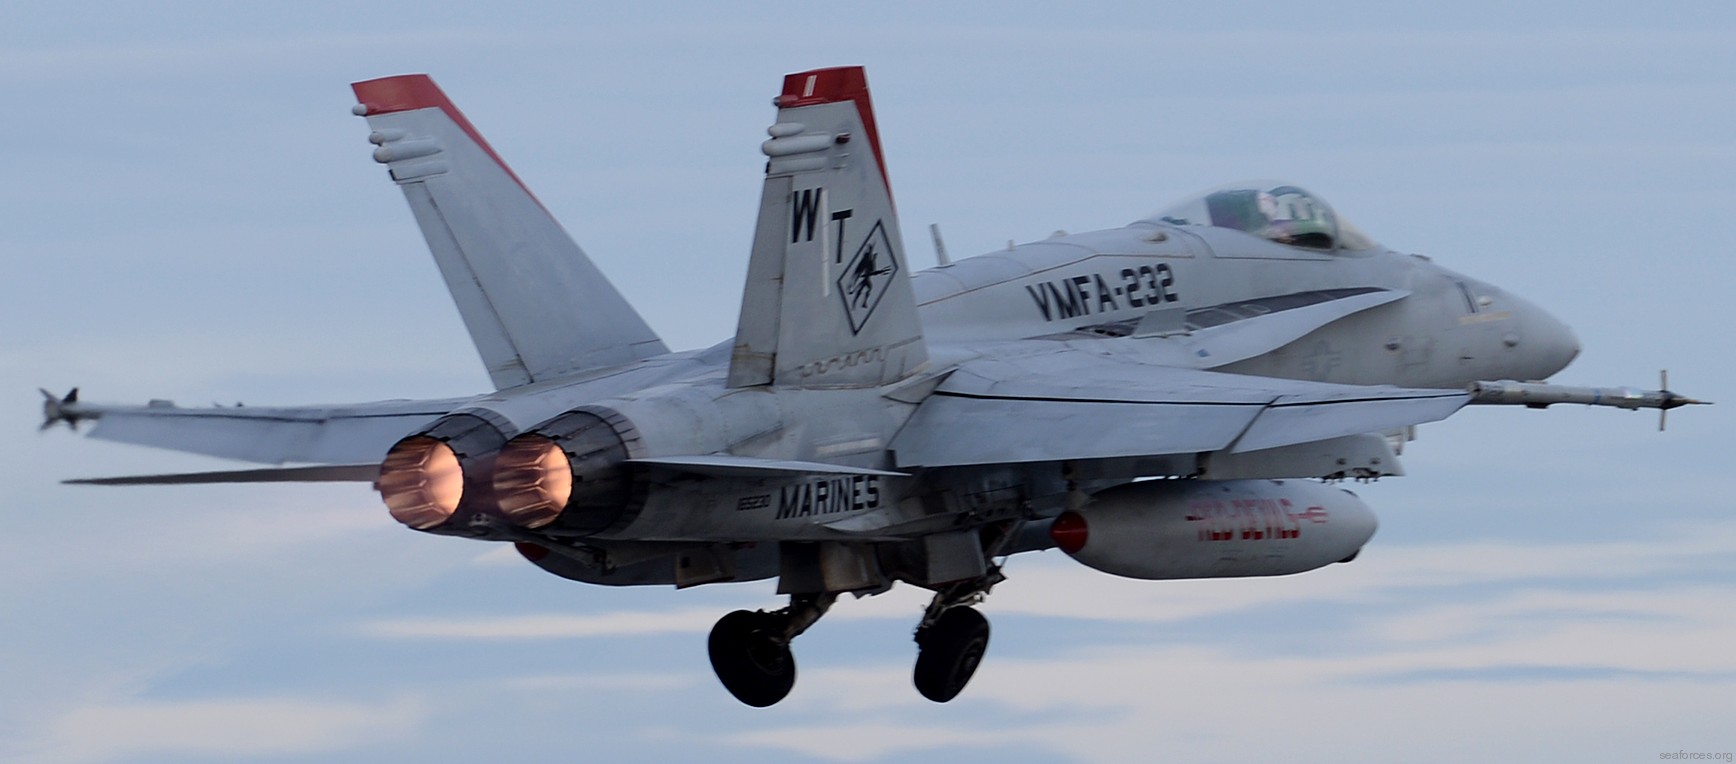 vmfa-232 red devils marine fighter attack squadron usmc f/a-18c hornet 115 eielson air force base afb alaska